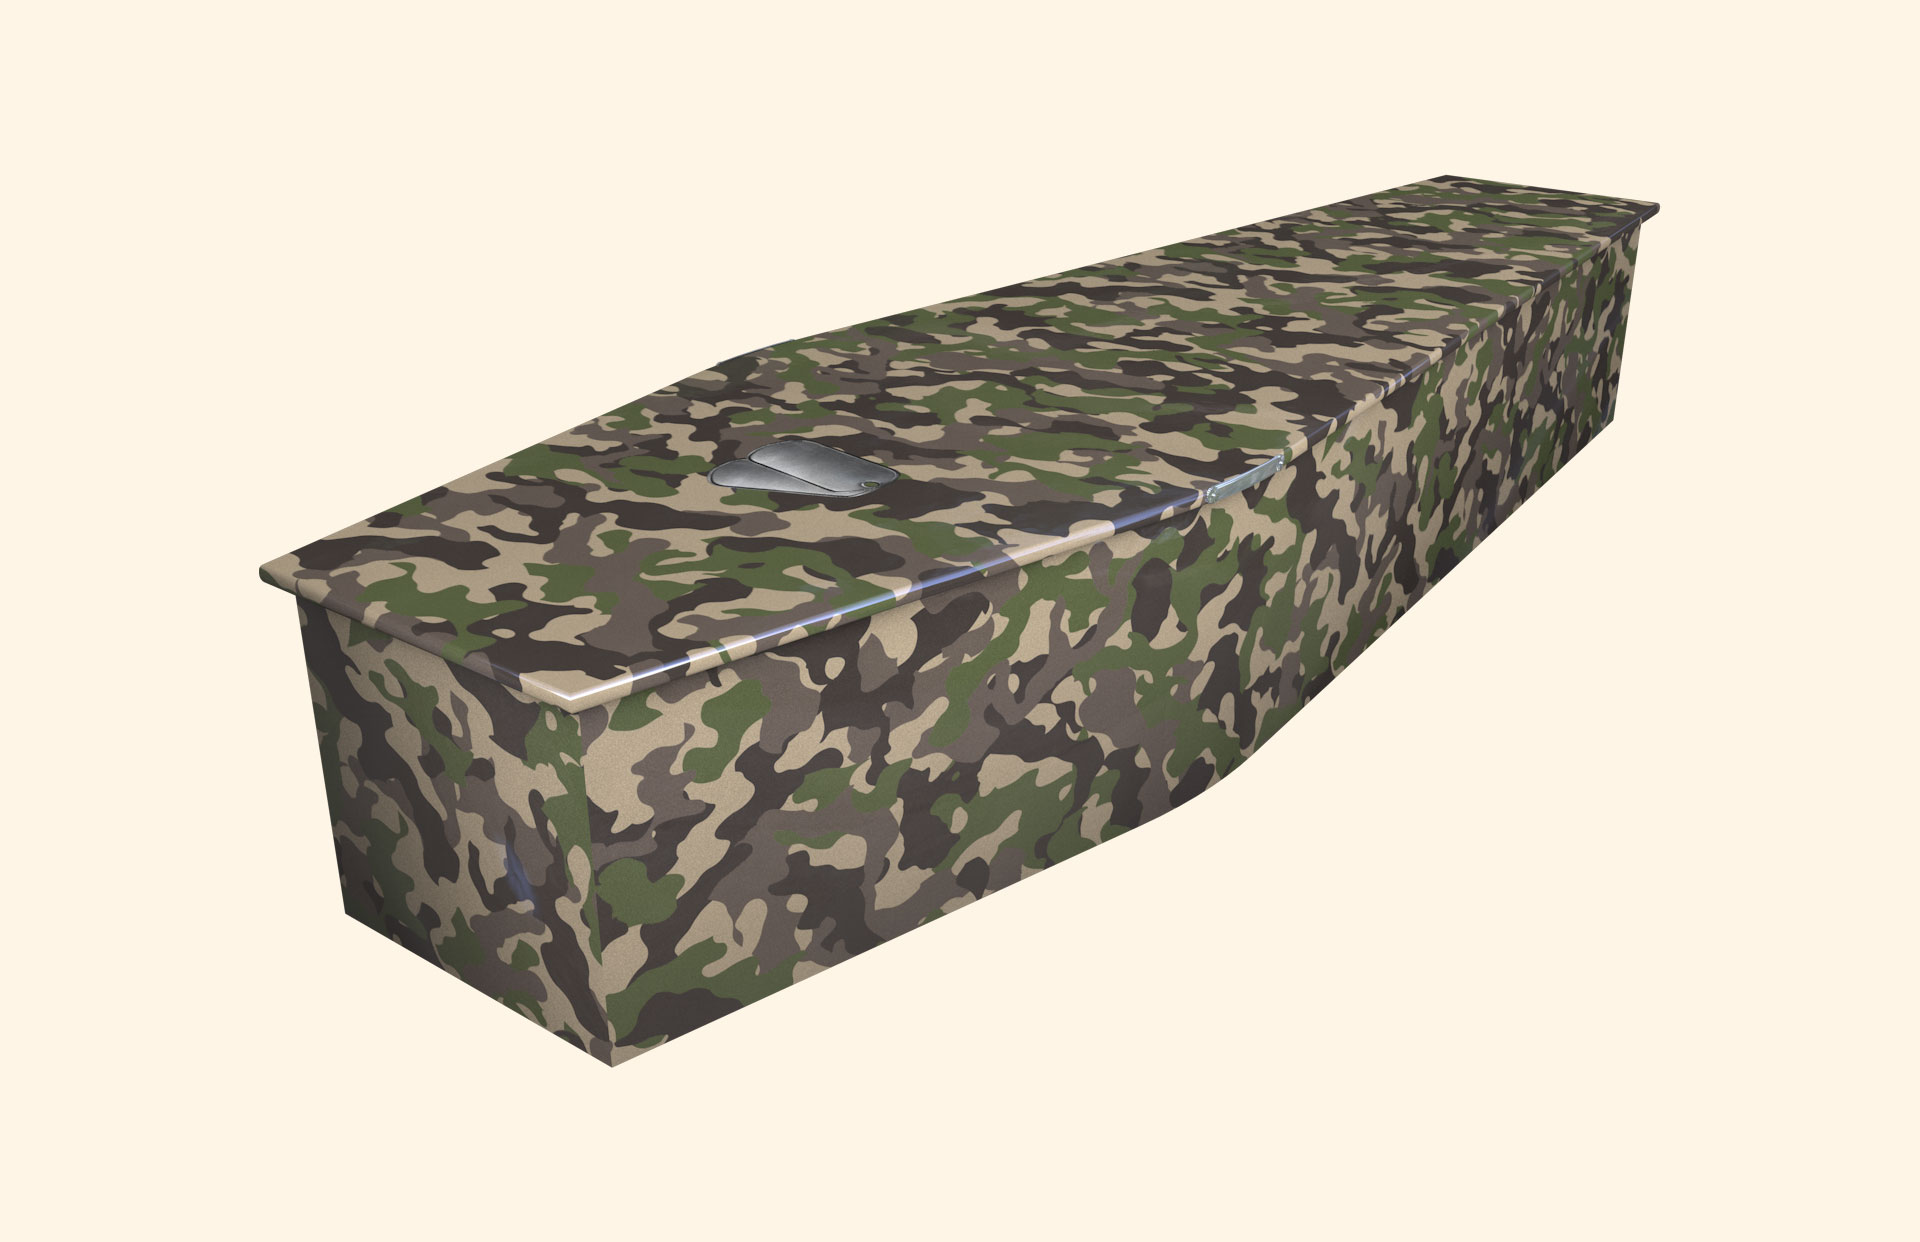 Camo design on a traditional coffin